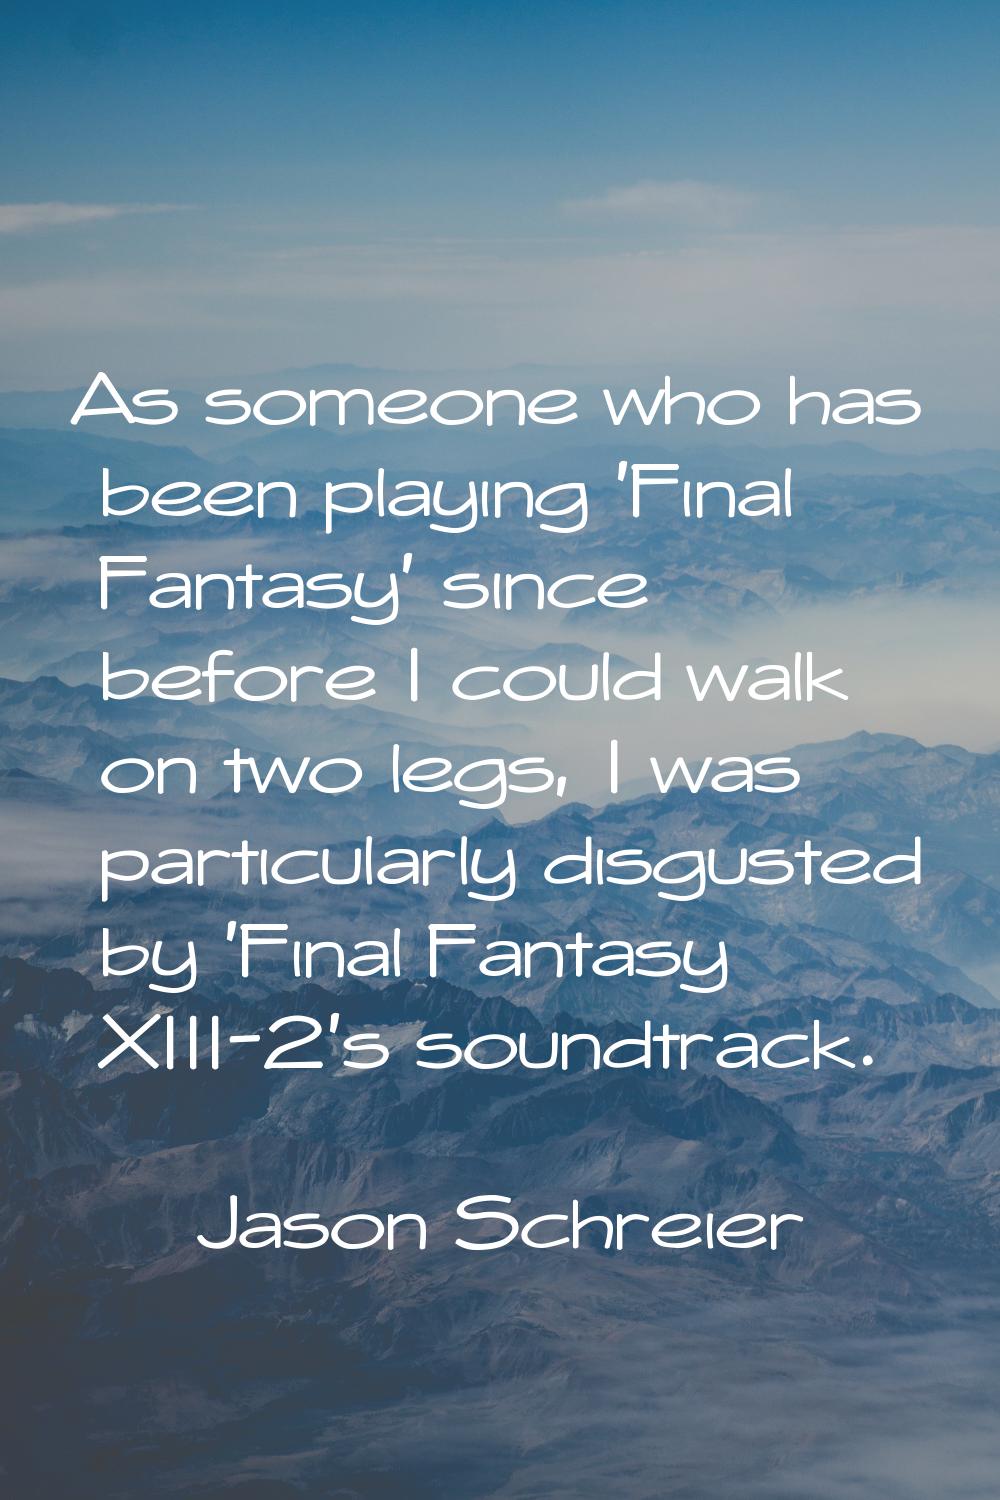 As someone who has been playing 'Final Fantasy' since before I could walk on two legs, I was partic